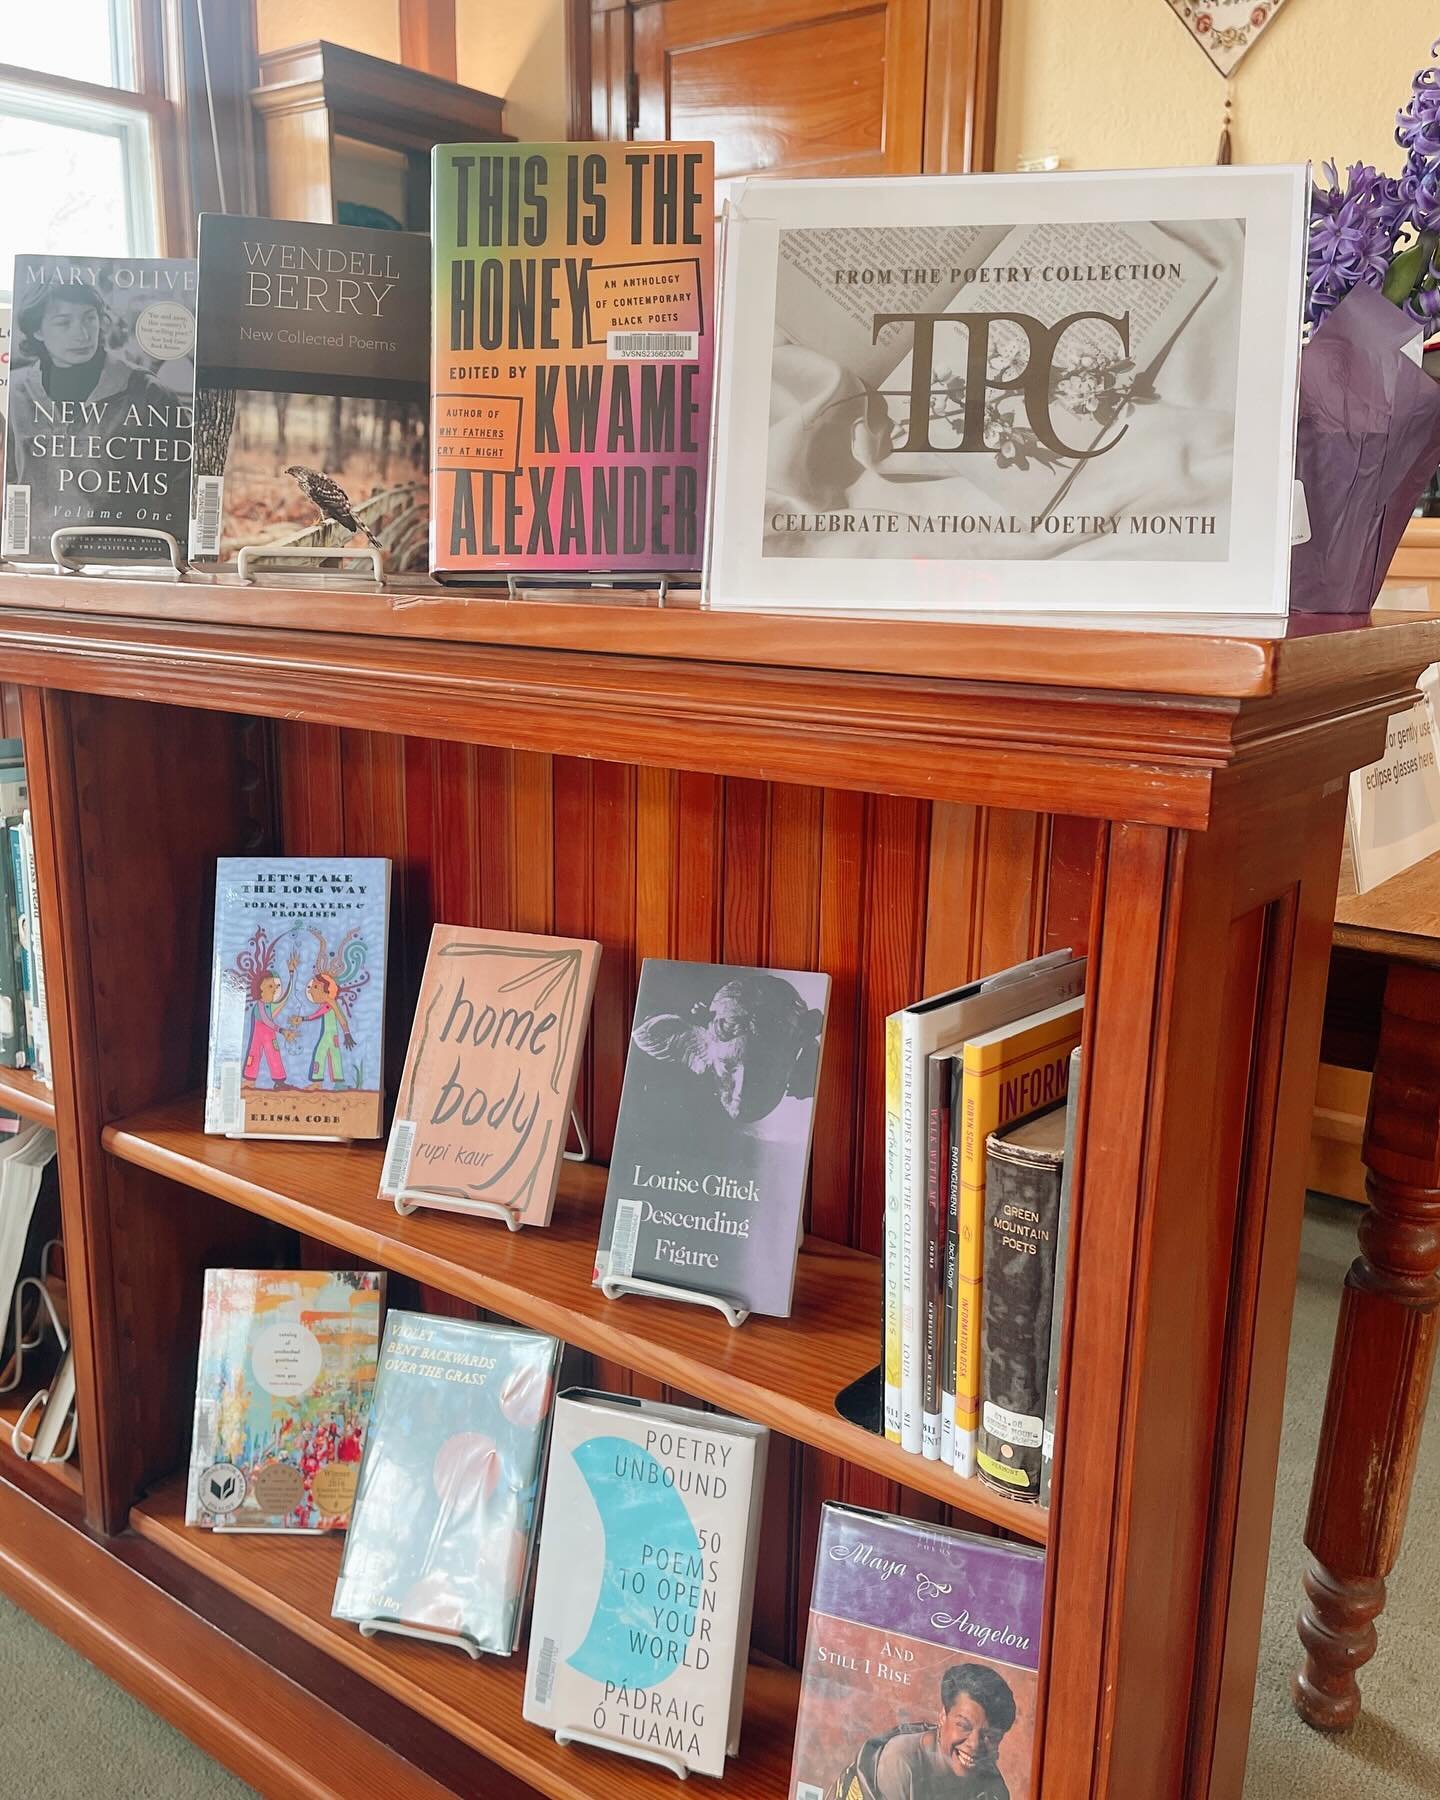 We&rsquo;re celebrating all things poetry at LML this month! Check out our new display in honor of National Poetry Month next time you&rsquo;re at the library.